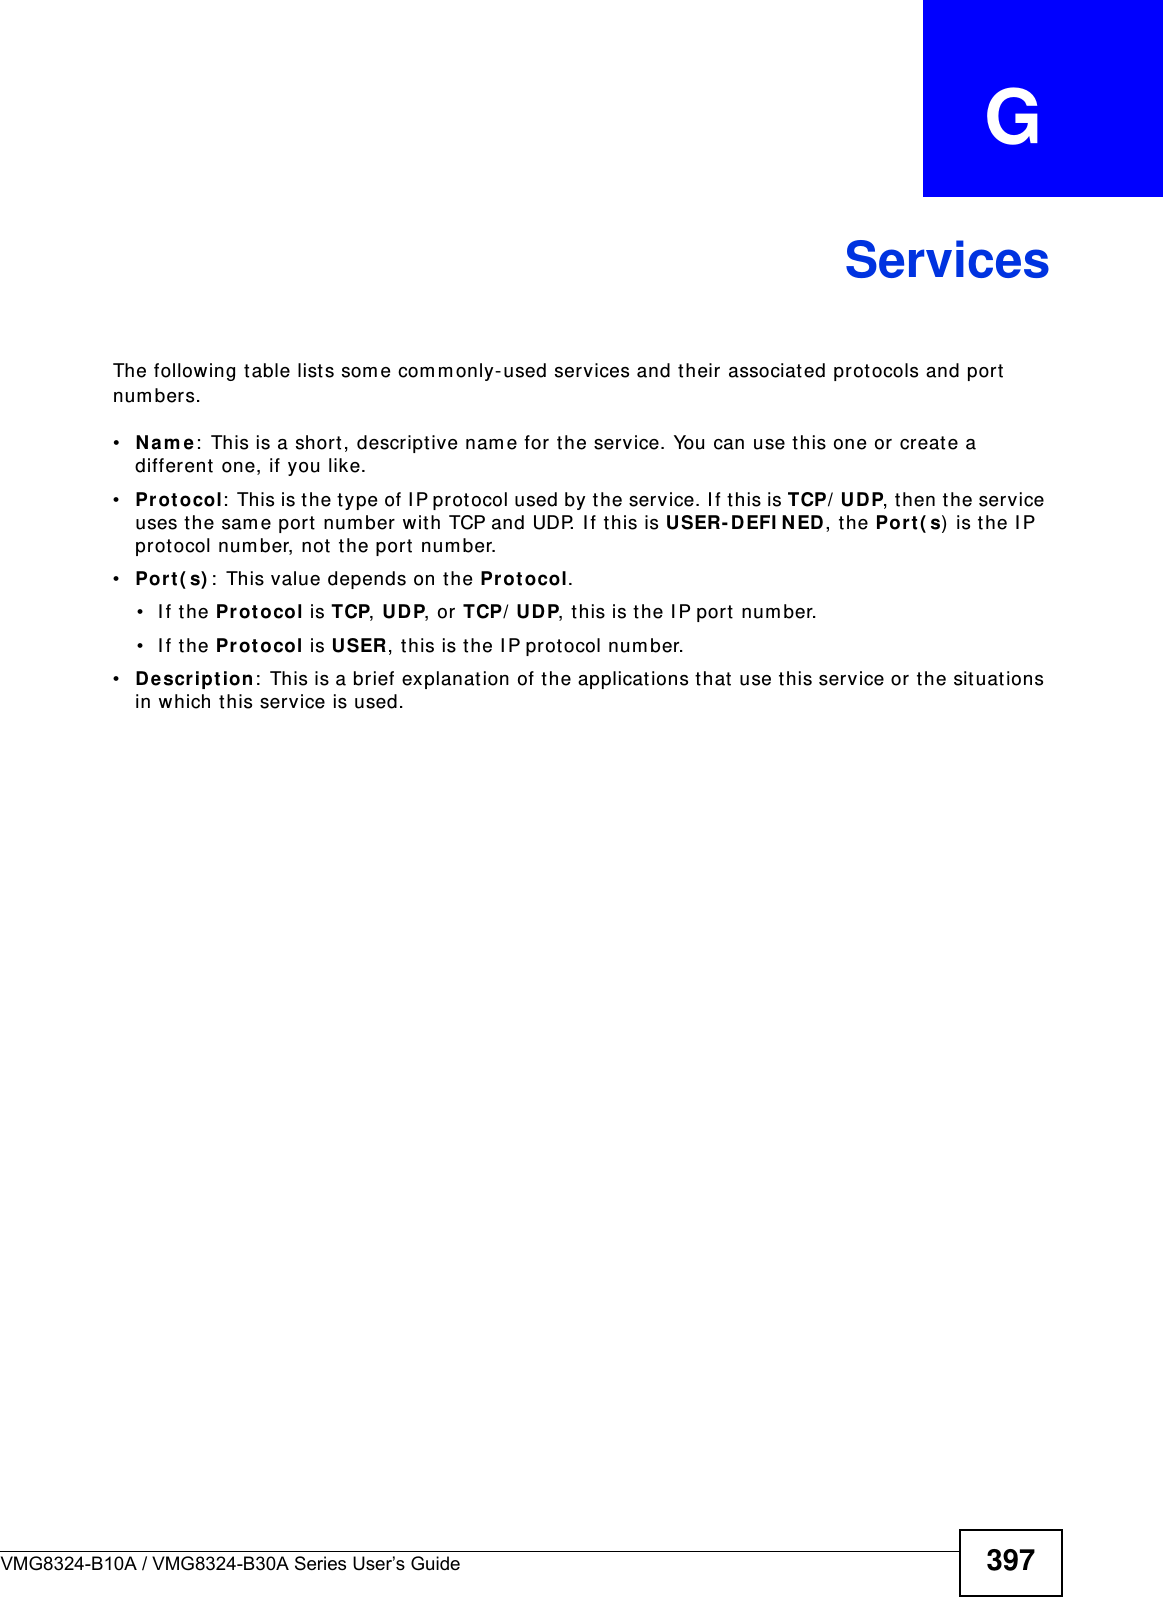 VMG8324-B10A / VMG8324-B30A Series User’s Guide 397APPENDIX   GServicesThe following t able list s som e com m only-used services and t heir associated protocols and port  num ber s.•N a m e :  This is a short , descriptive nam e for t he service. You can use this one or create a different  one, if you like.•Pr ot ocol:  Th is is t h e t y p e of I P p r ot oco l u sed by  t h e ser v ice. I f t h is is TCP/ UDP, then the service uses the sam e port  num ber wit h TCP and UDP. I f t his is USER- D EFI N ED, t he Po rt ( s)  is t he I P protocol num ber, not the port  num ber.•Po rt ( s) :  This value depends on the Pr ot ocol.• If the Pr ot ocol is TCP, UD P, or TCP/ UDP, t his is the I P port  num ber.• If the Pr ot ocol is USER, t his is the I P protocol num ber.•D e scr ip t ion :  This is a brief explanation of t he applicat ions that use t his service or t he situations in which this service is used.